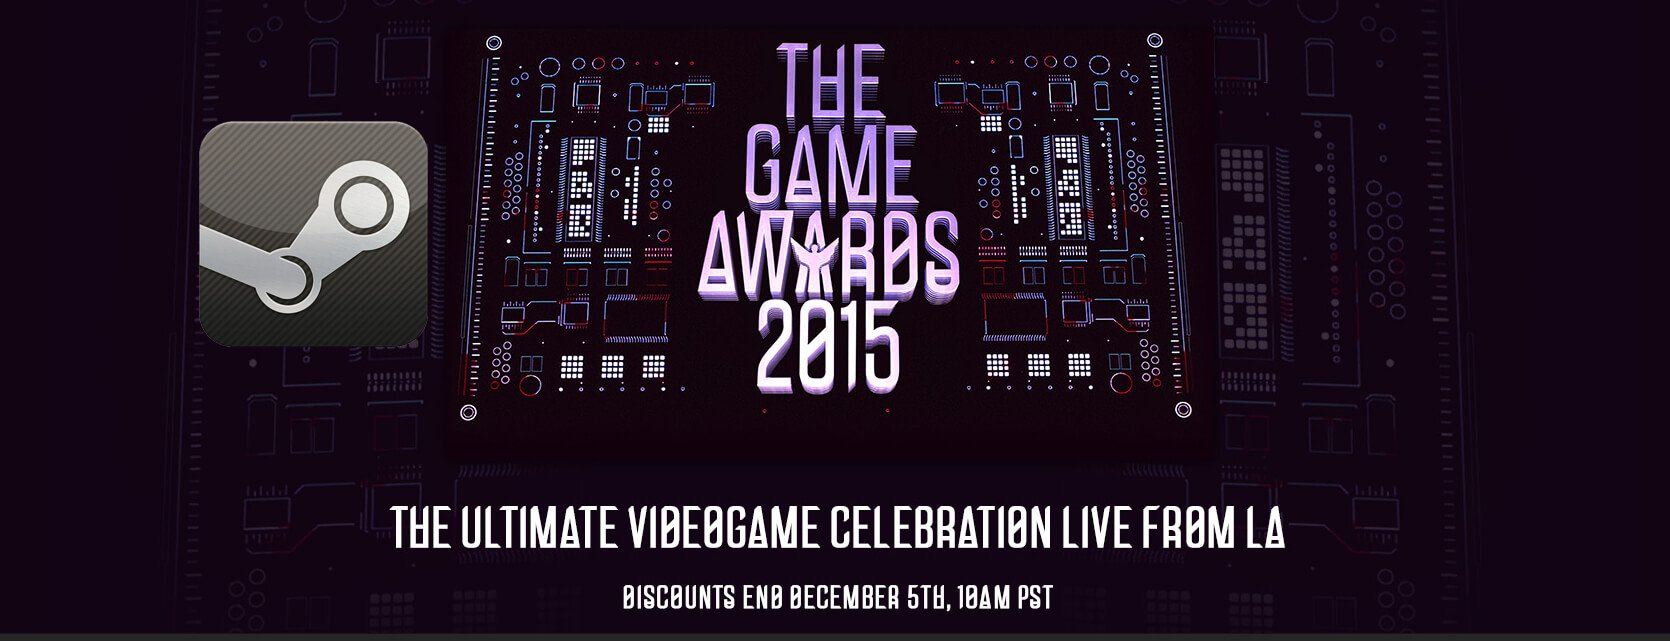 The Game Awards 2015 - GAME OF THE YEAR 